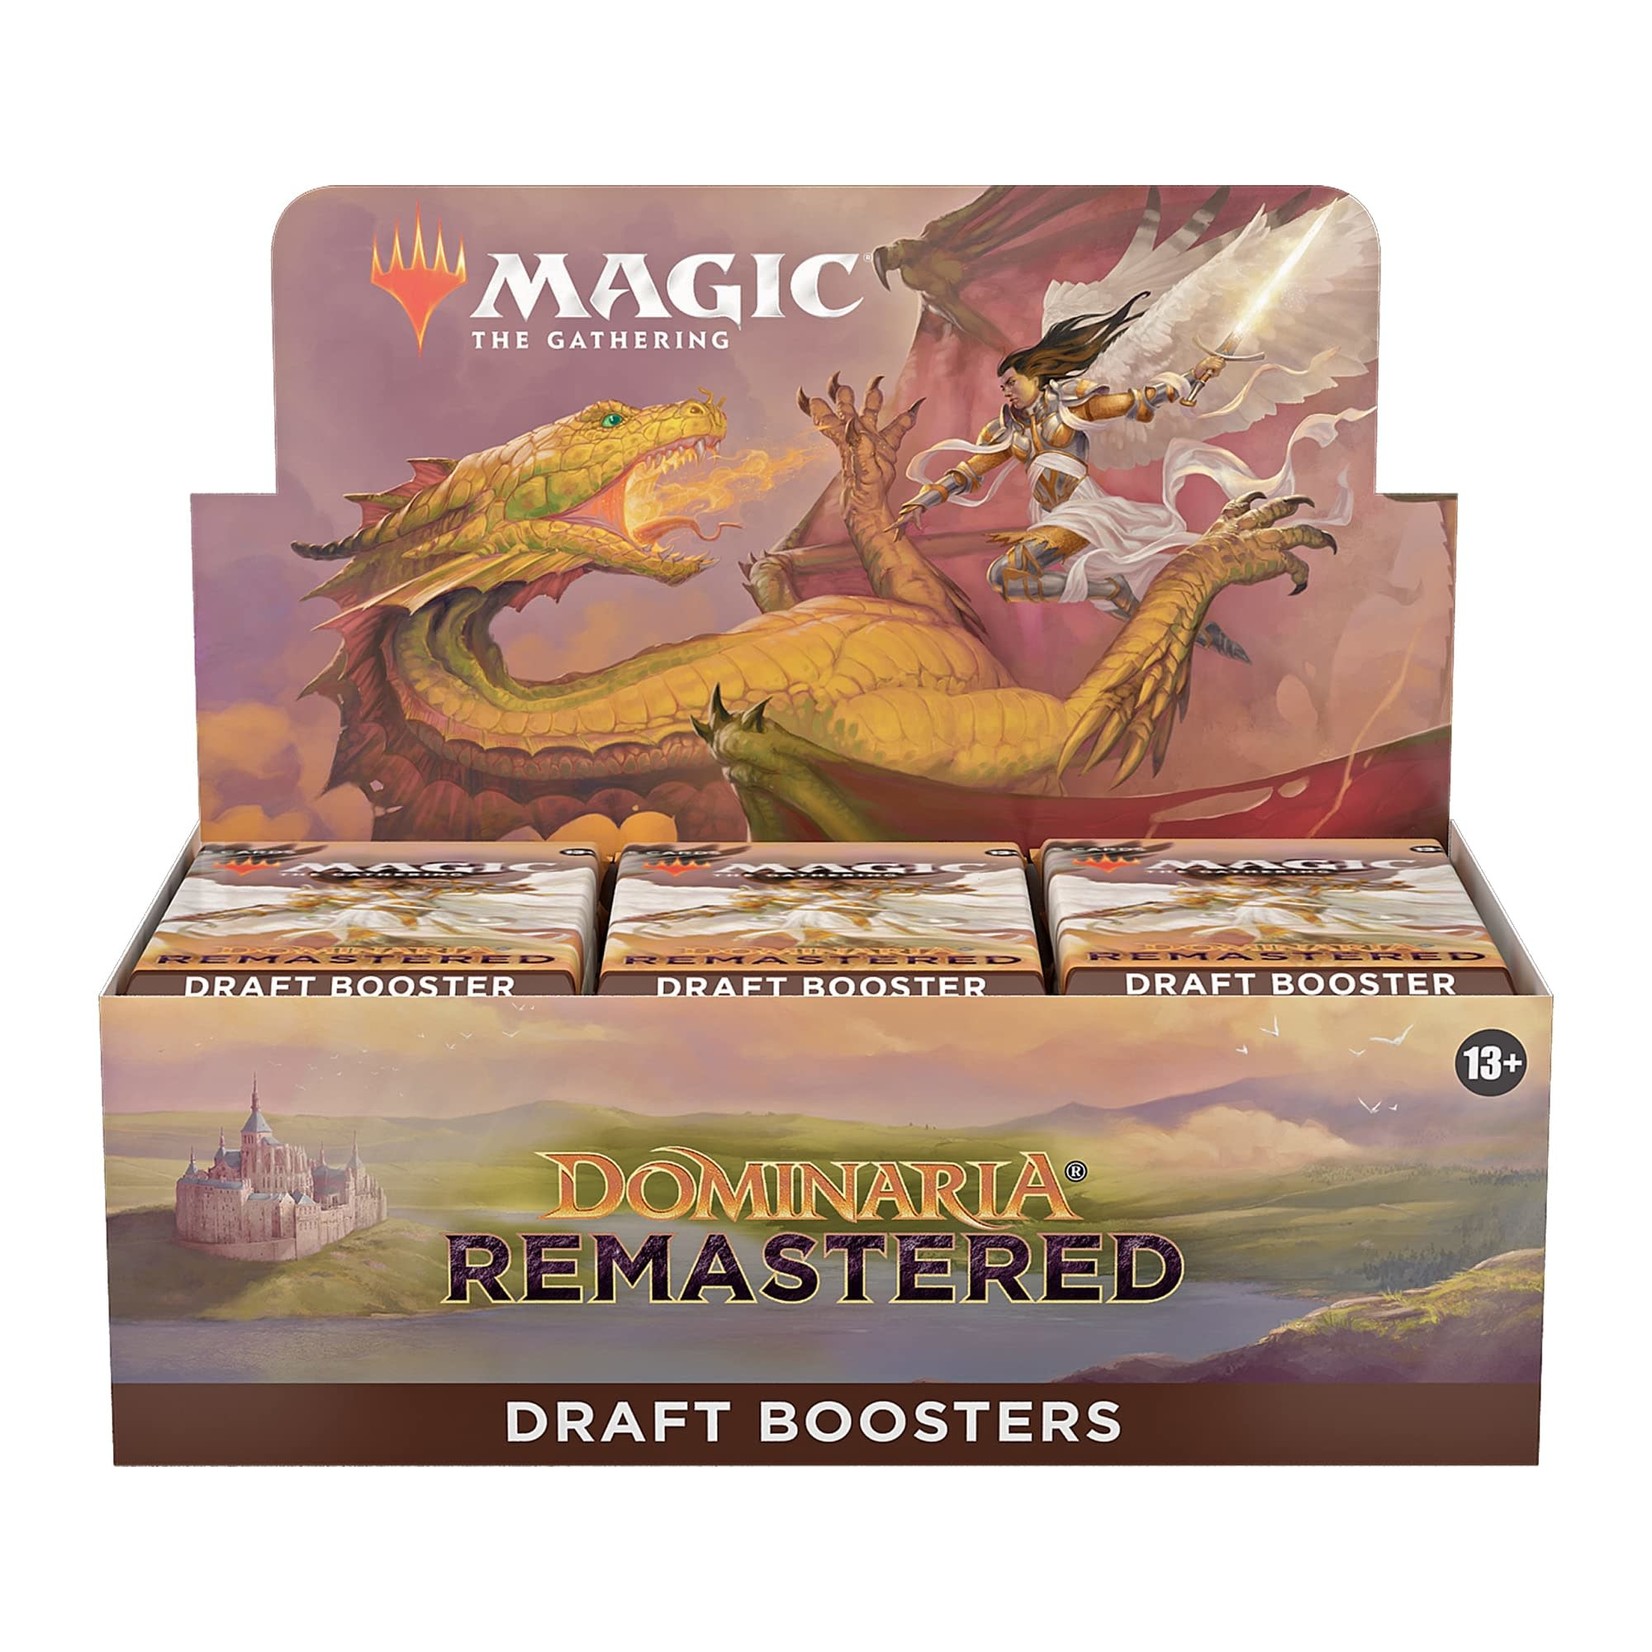 Wizards of the Coast Magic - Dominaria Remastered Draft Booster Box